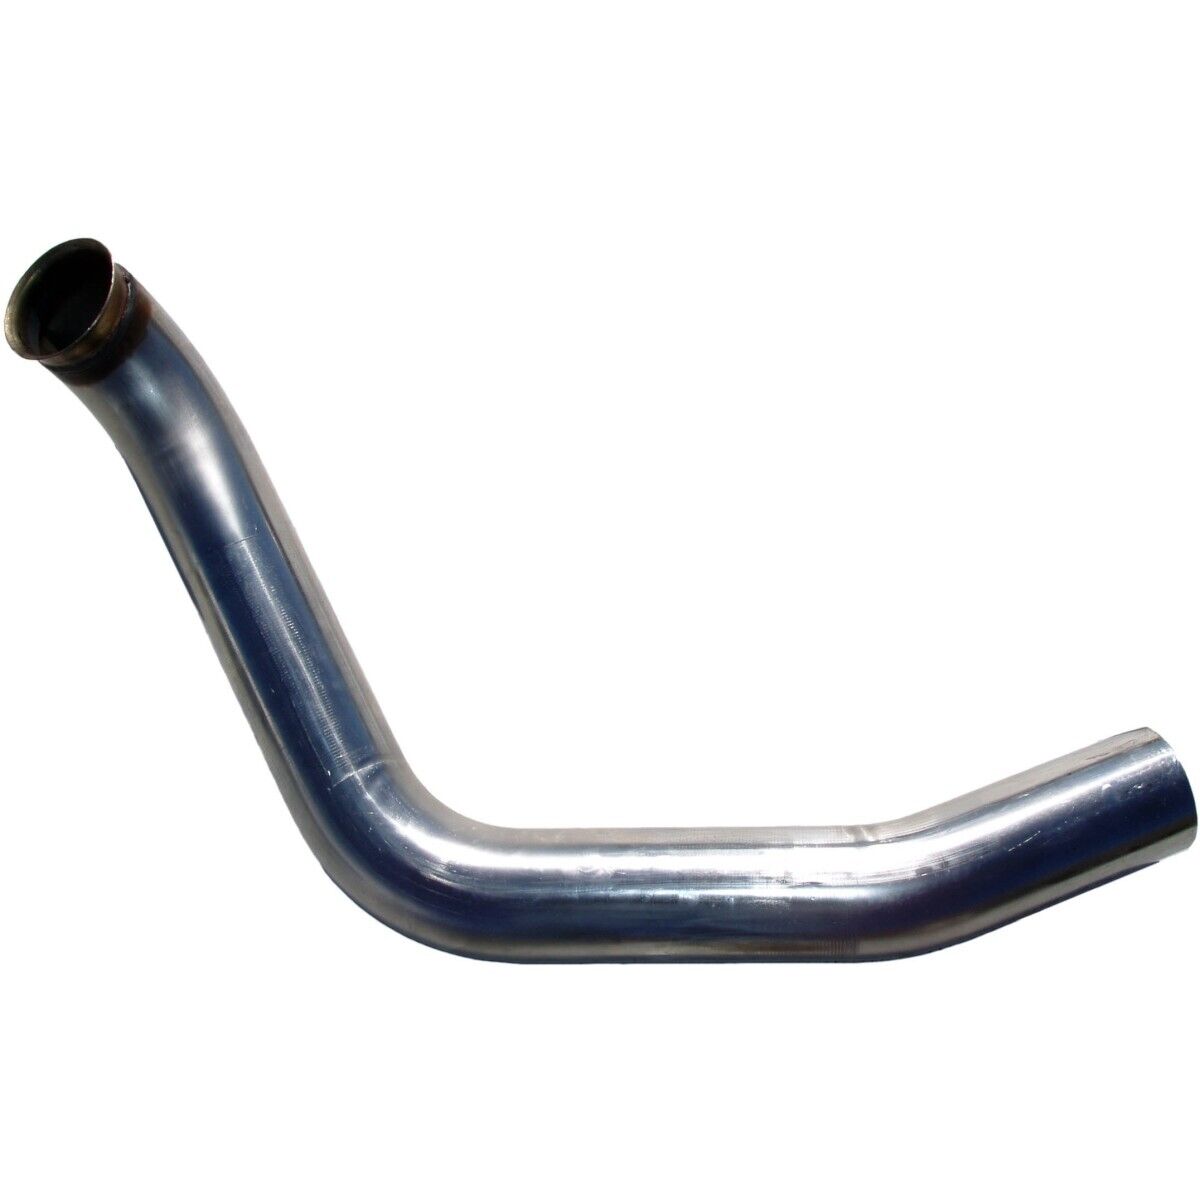 FS9401 MBRP Down Pipe for F250 Truck F350 Ford F-250 Super Duty F-350 1999-2003